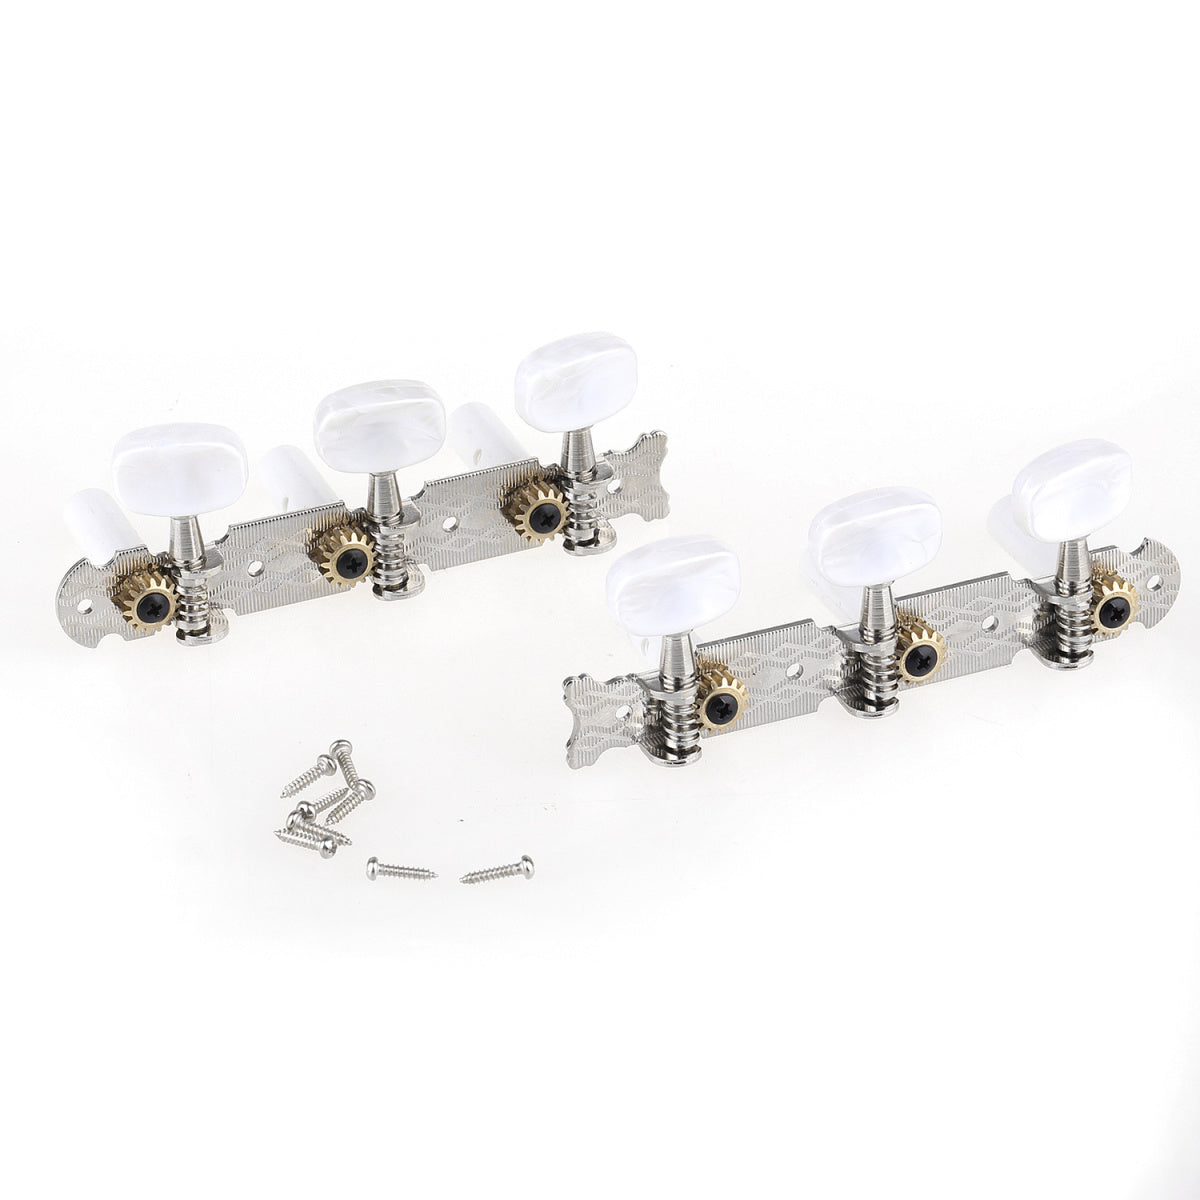 Musiclily Pro 3 on a Plate Classical Guitar Machine Heads Tuning Pegs Keys Tuners Set, Oval Button Nickel